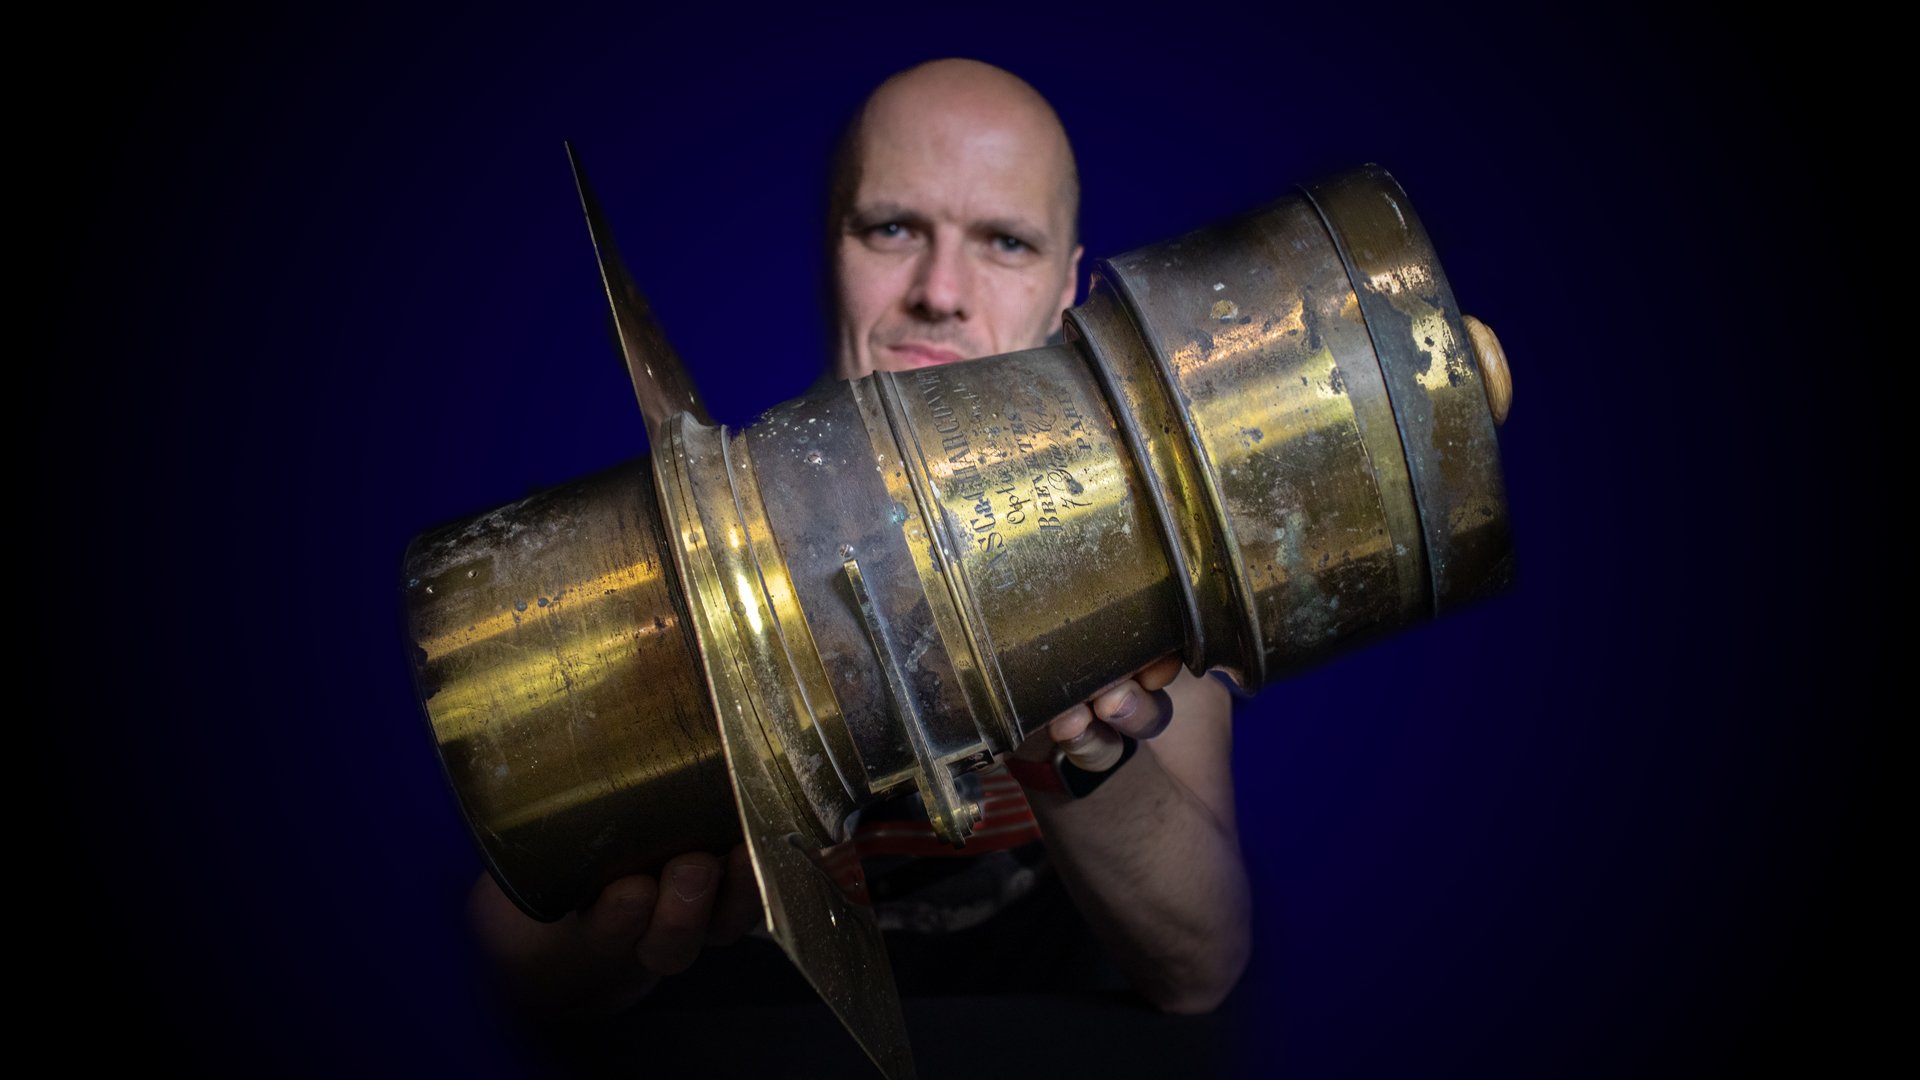 Bringing a Giant 160-Year-Old Petzval Lens Back to Life